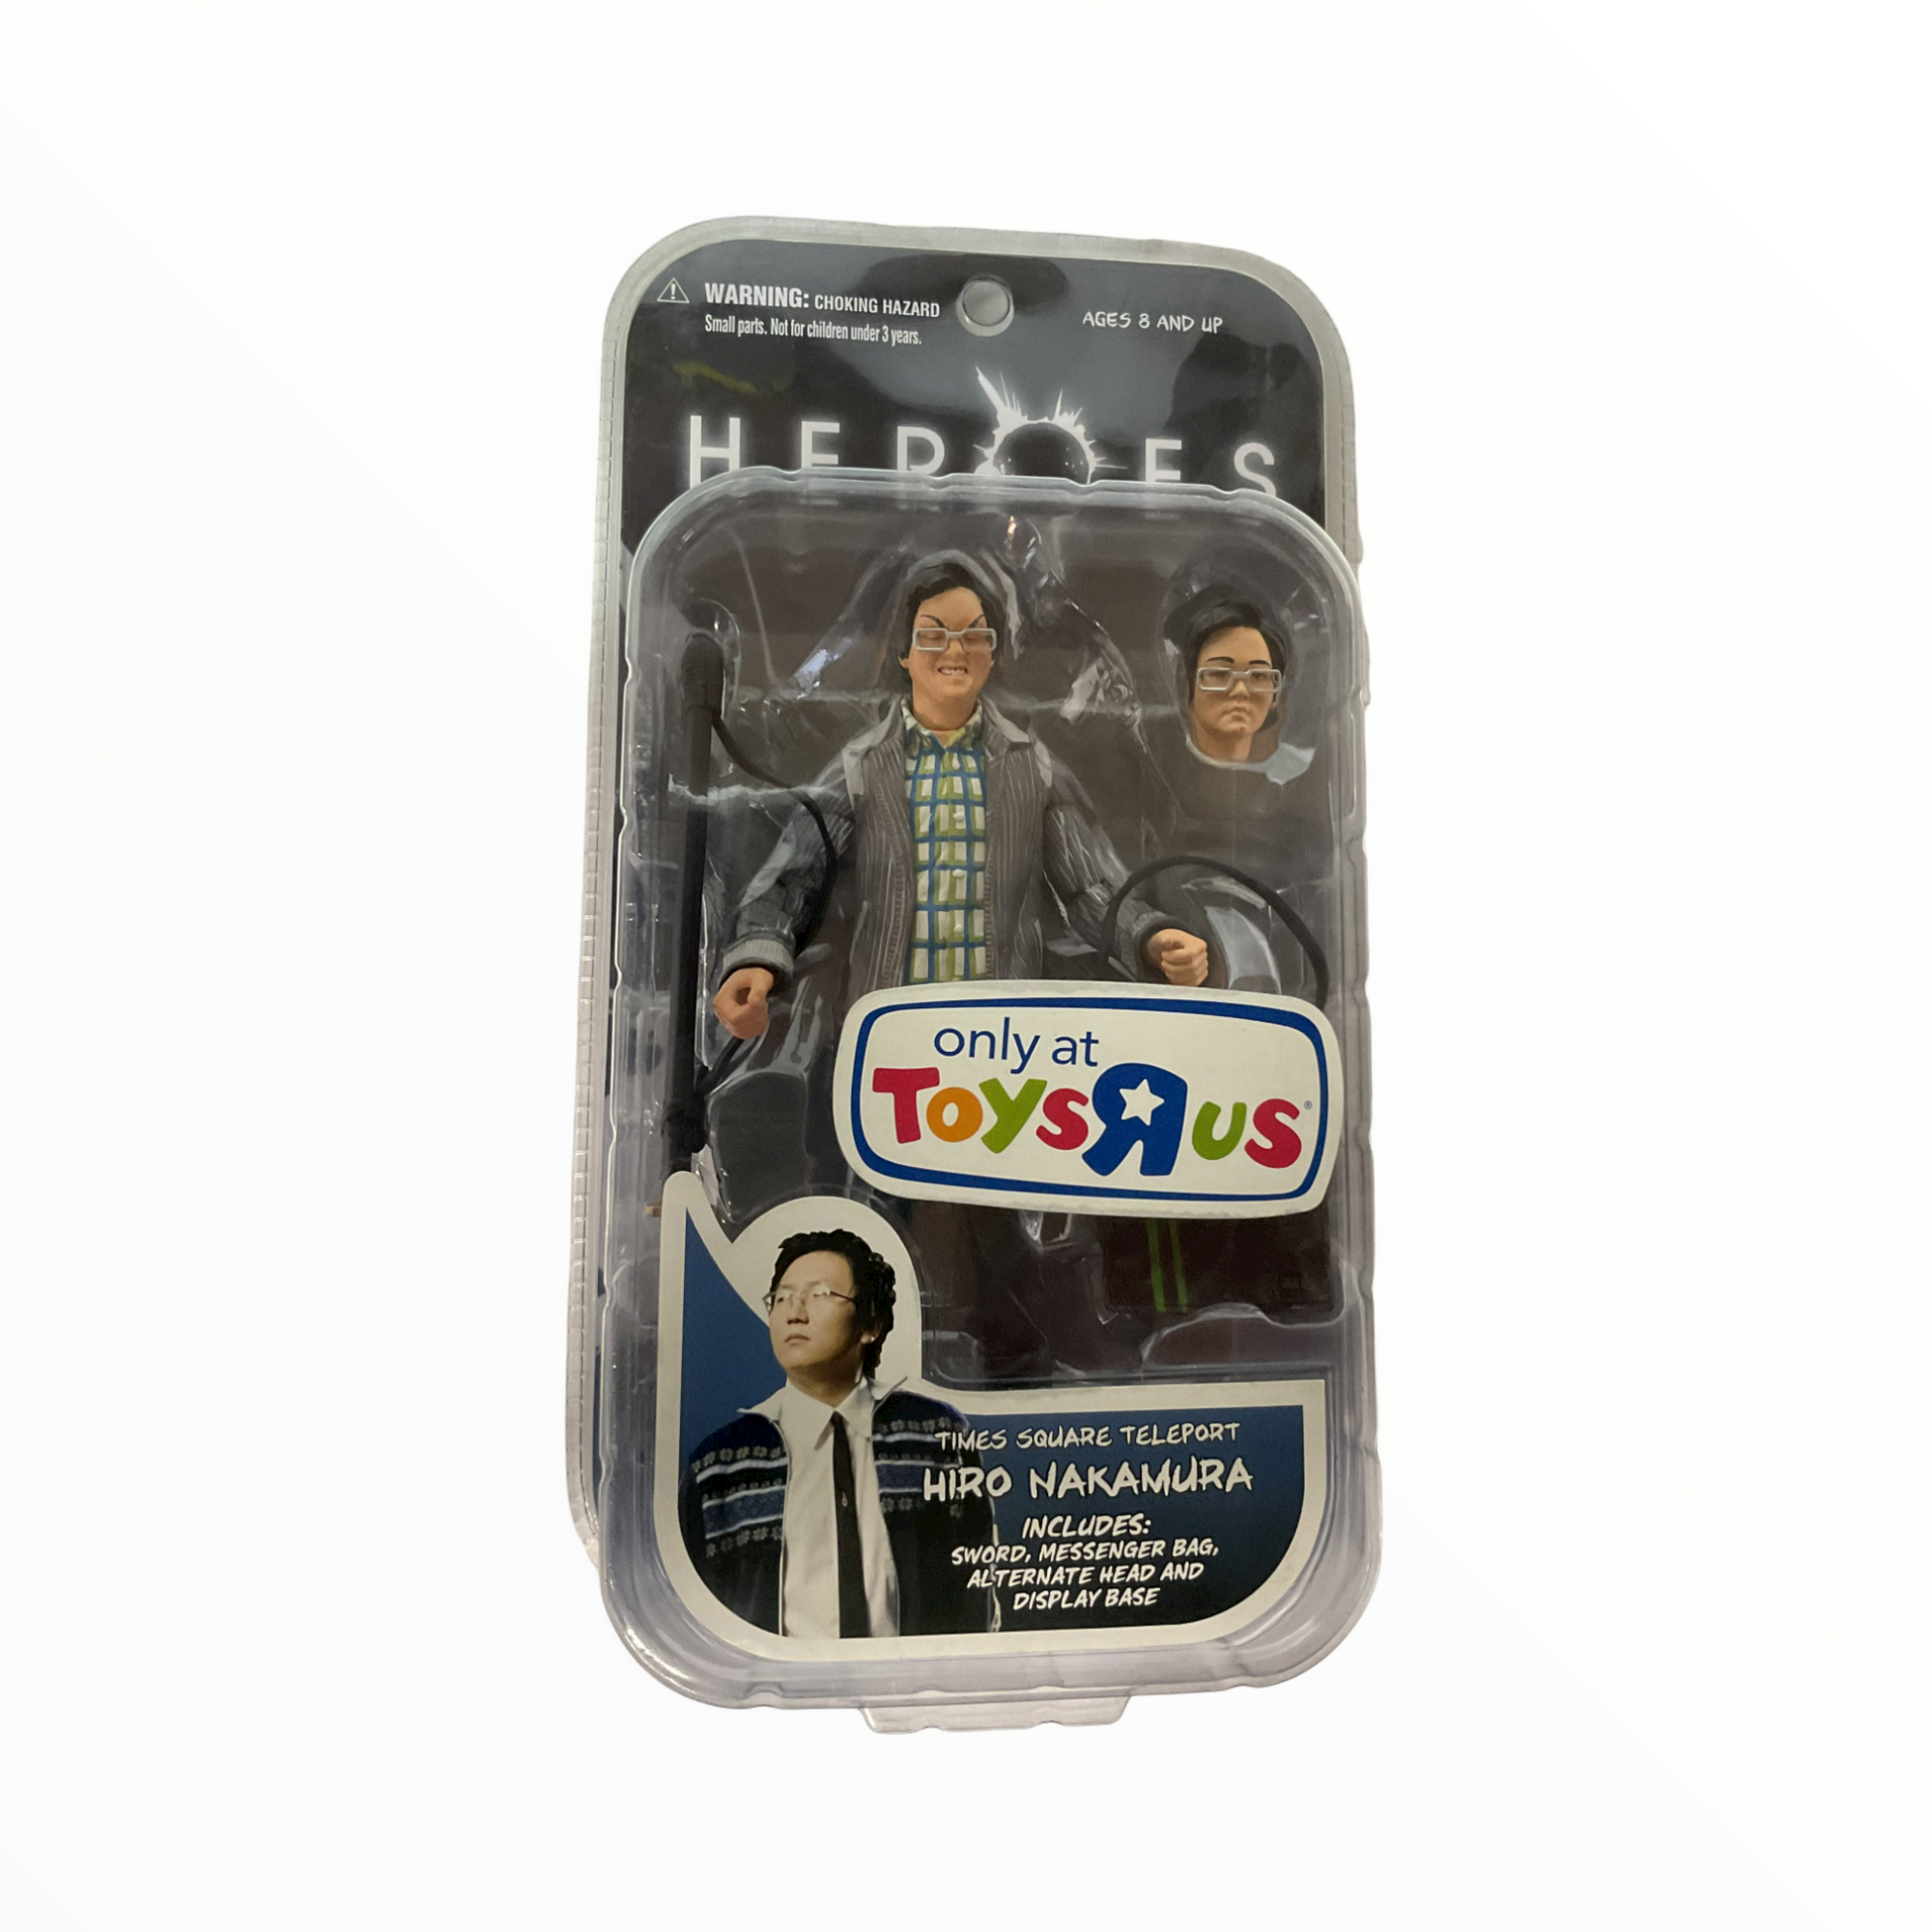 HEROES Series 1 'Times Square Teleport' Hiro Nakamura Action Figure by Mezco